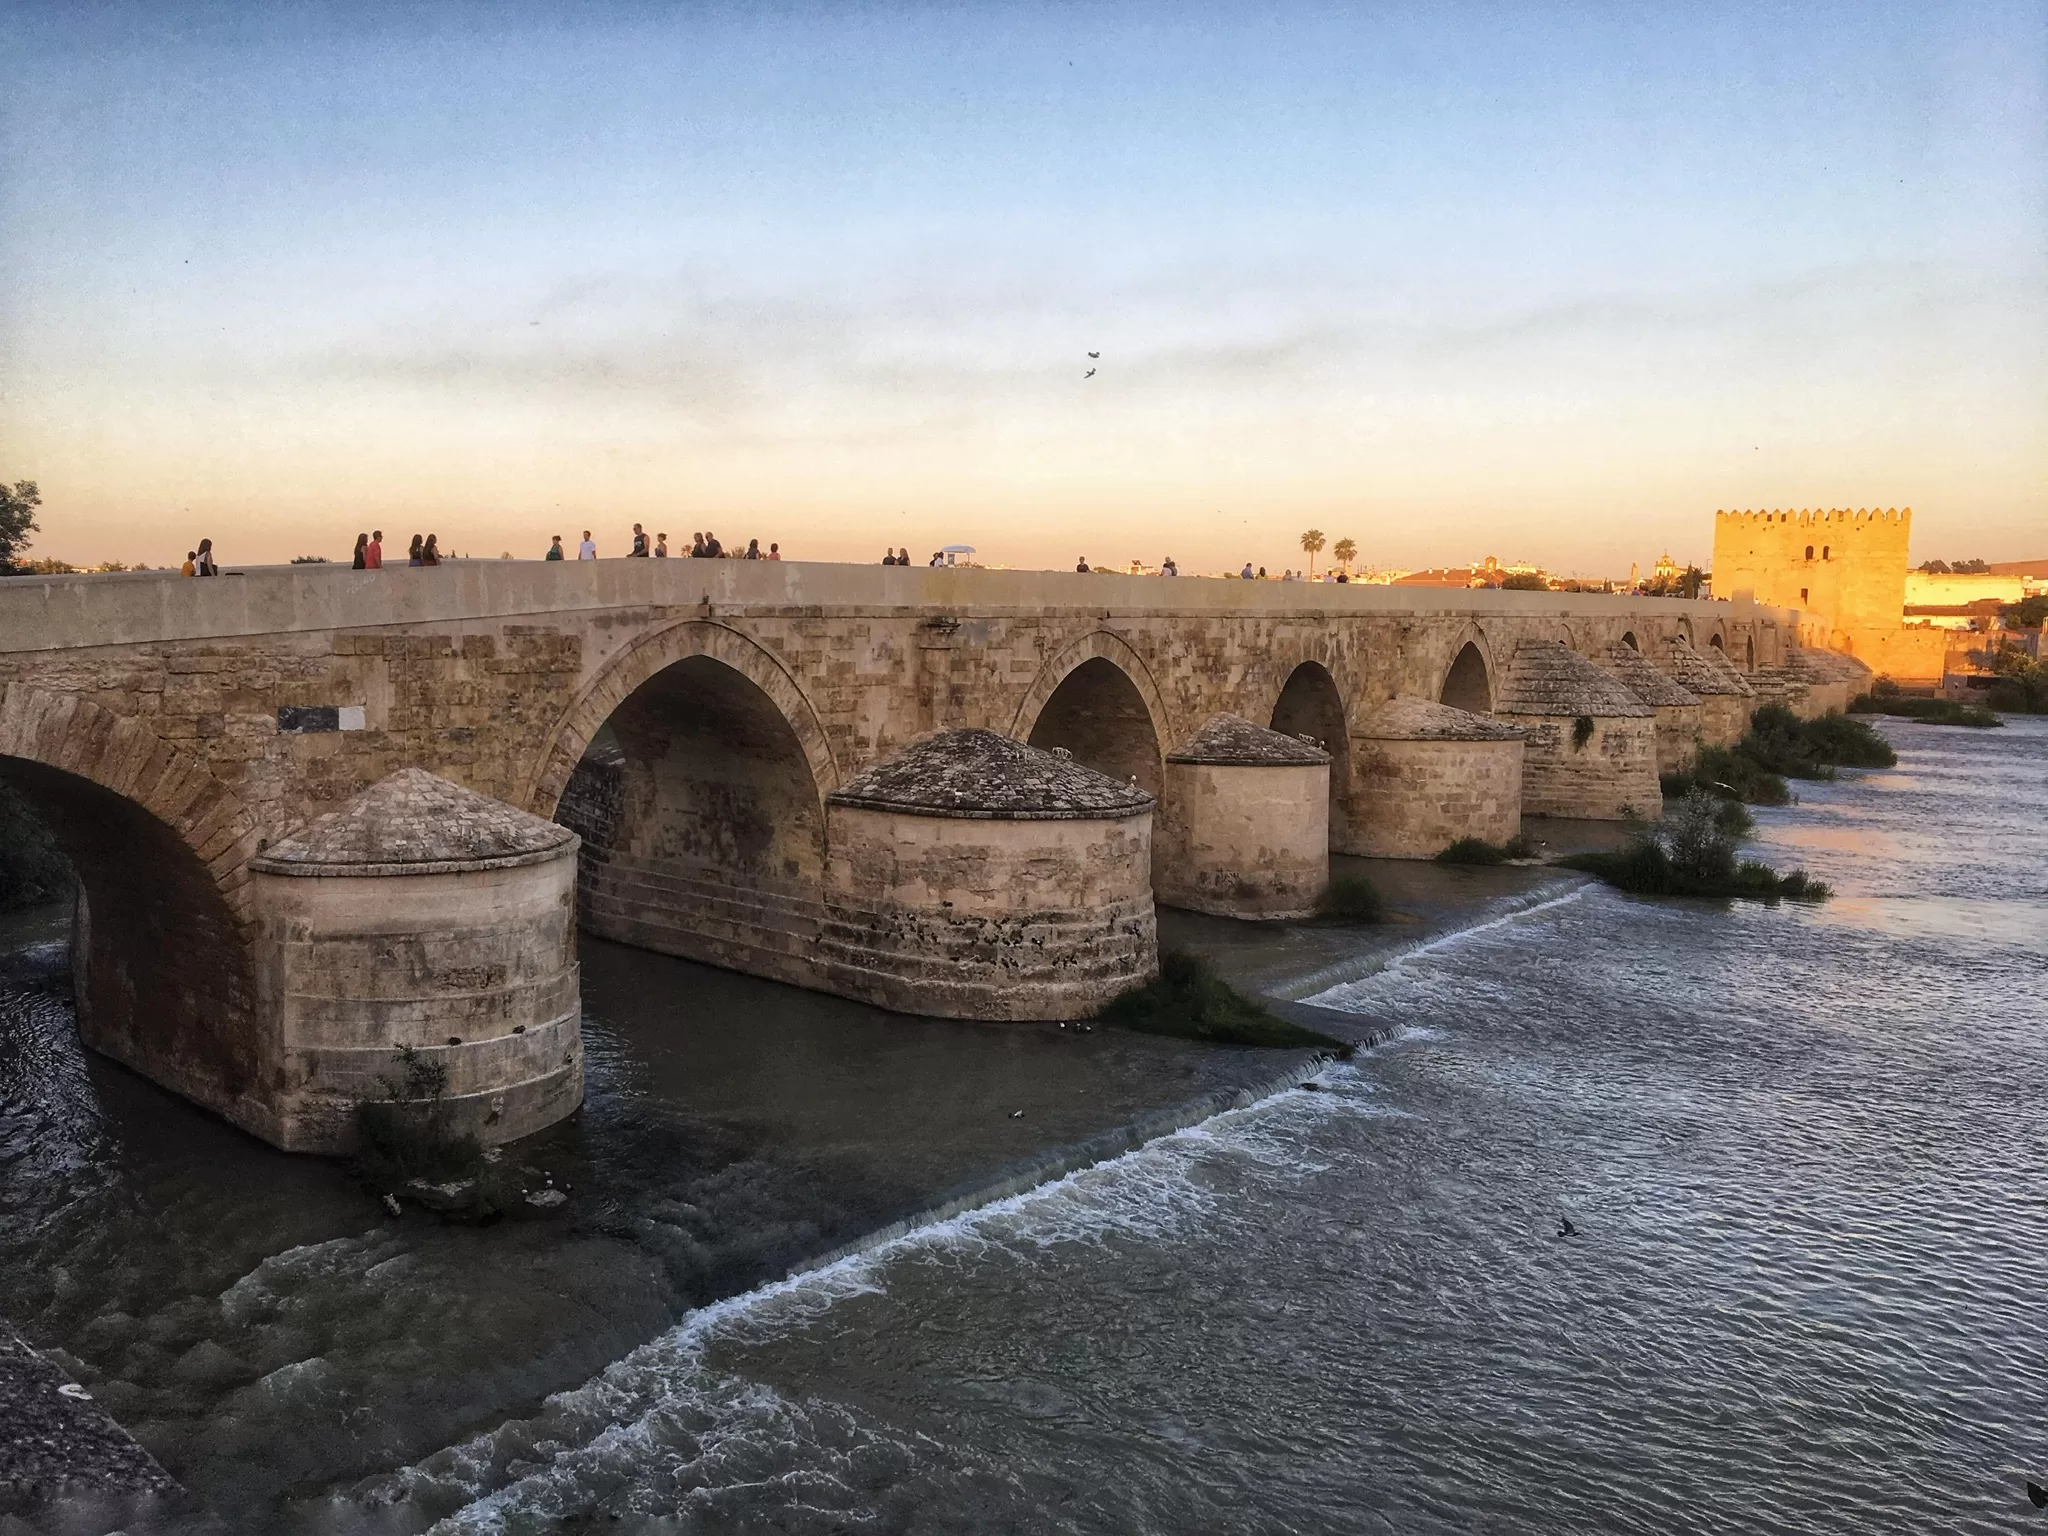 The City of Córdoba… This Visit was a Total Surprise!